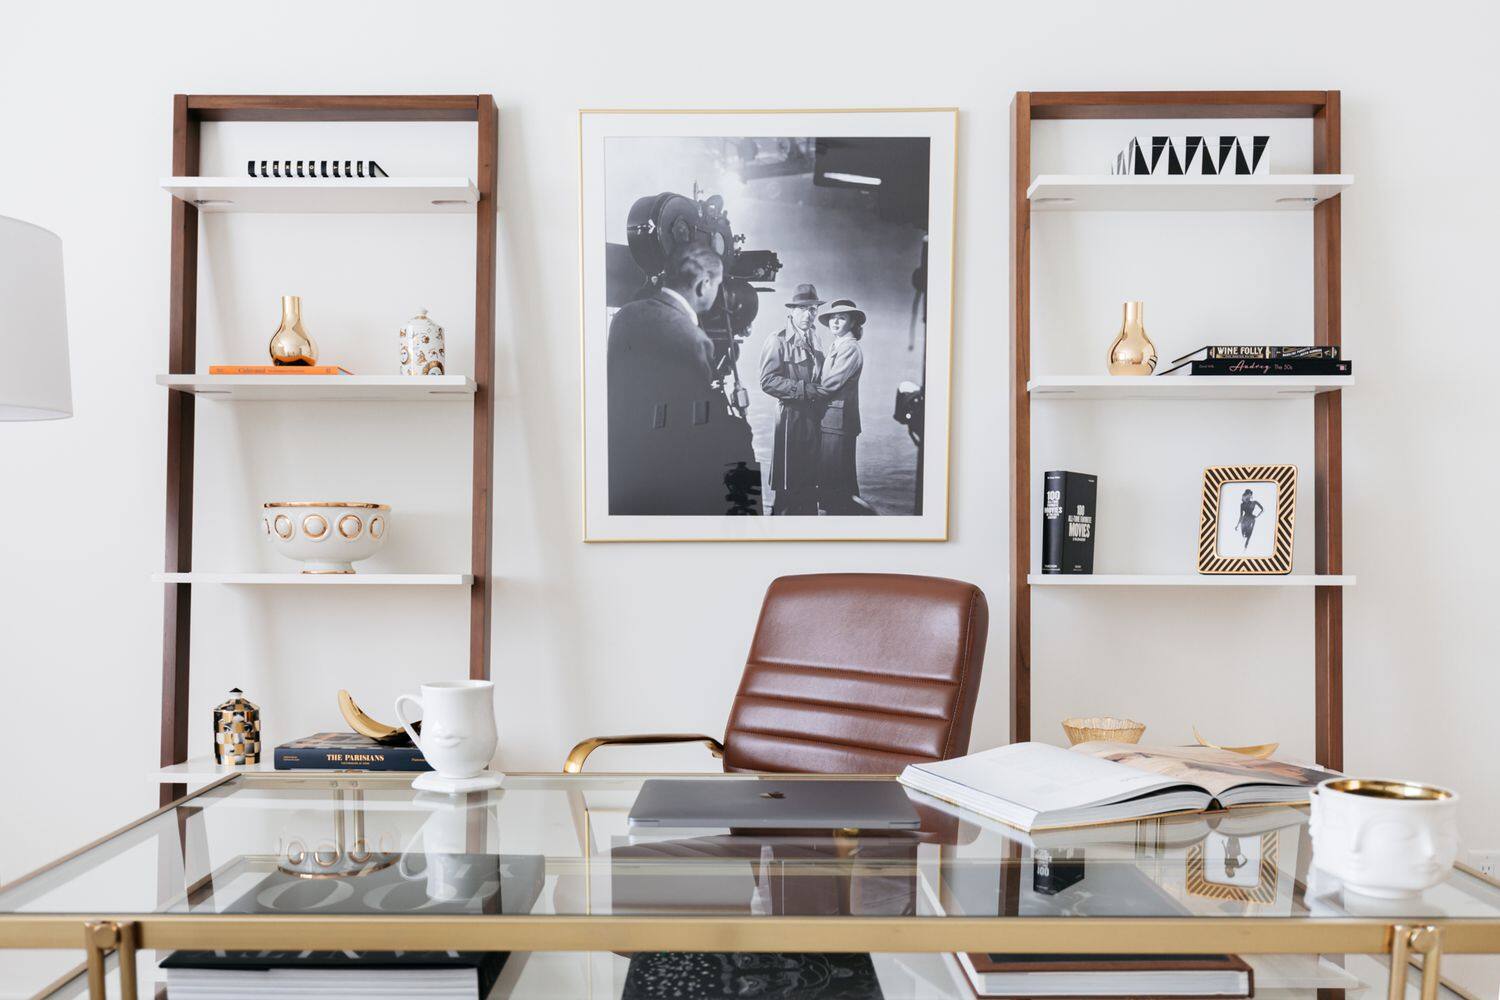 From Cluttered to Chic: Organizational Hacks for a Tidy Home